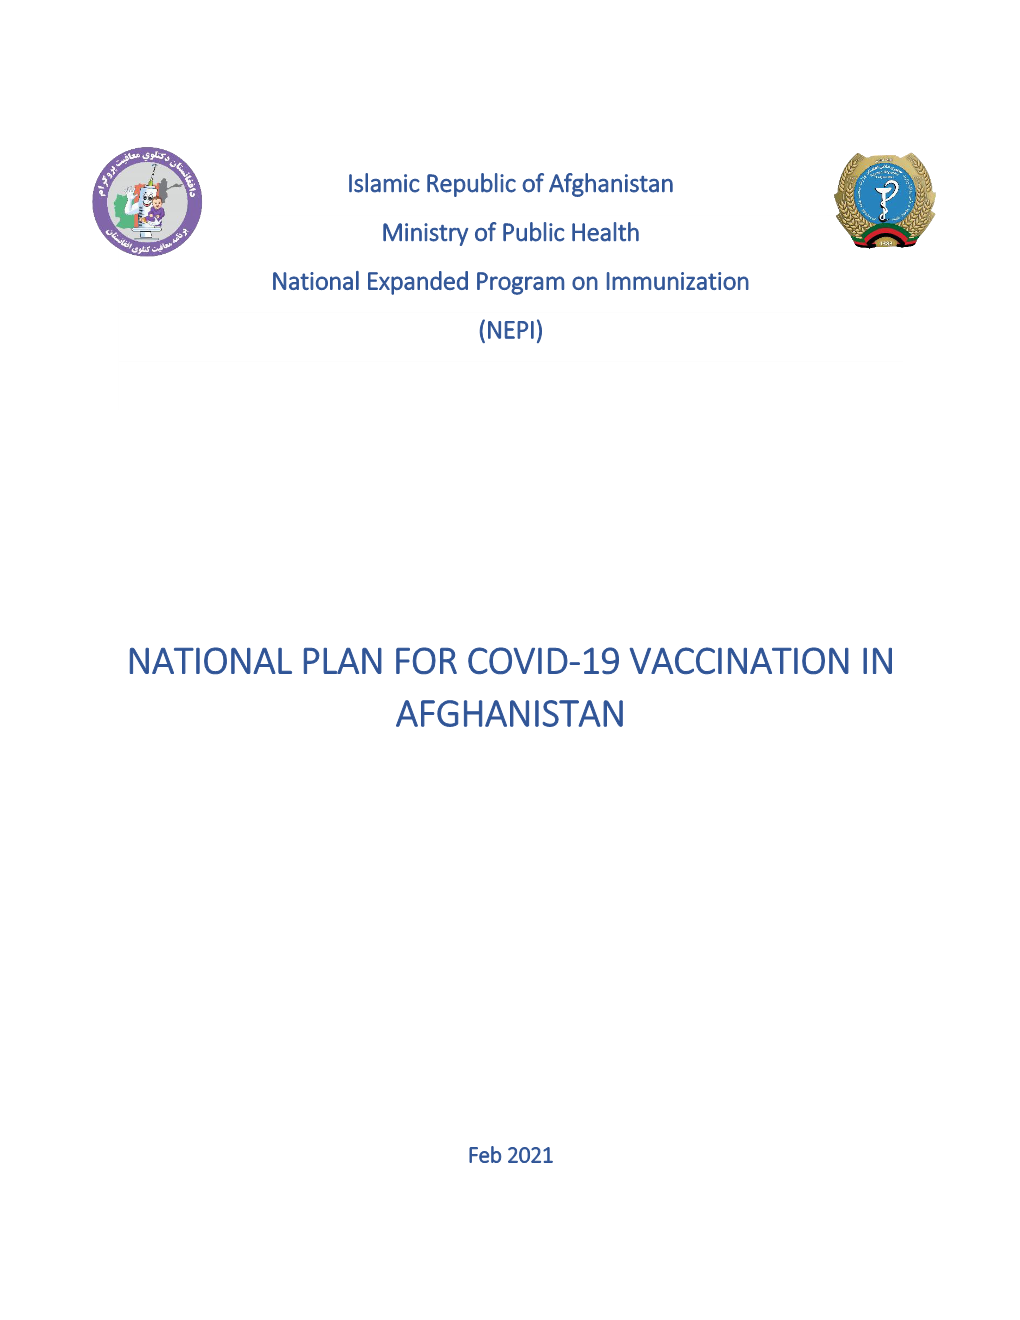 National Plan for Covid-19 Vaccination in Afghanistan